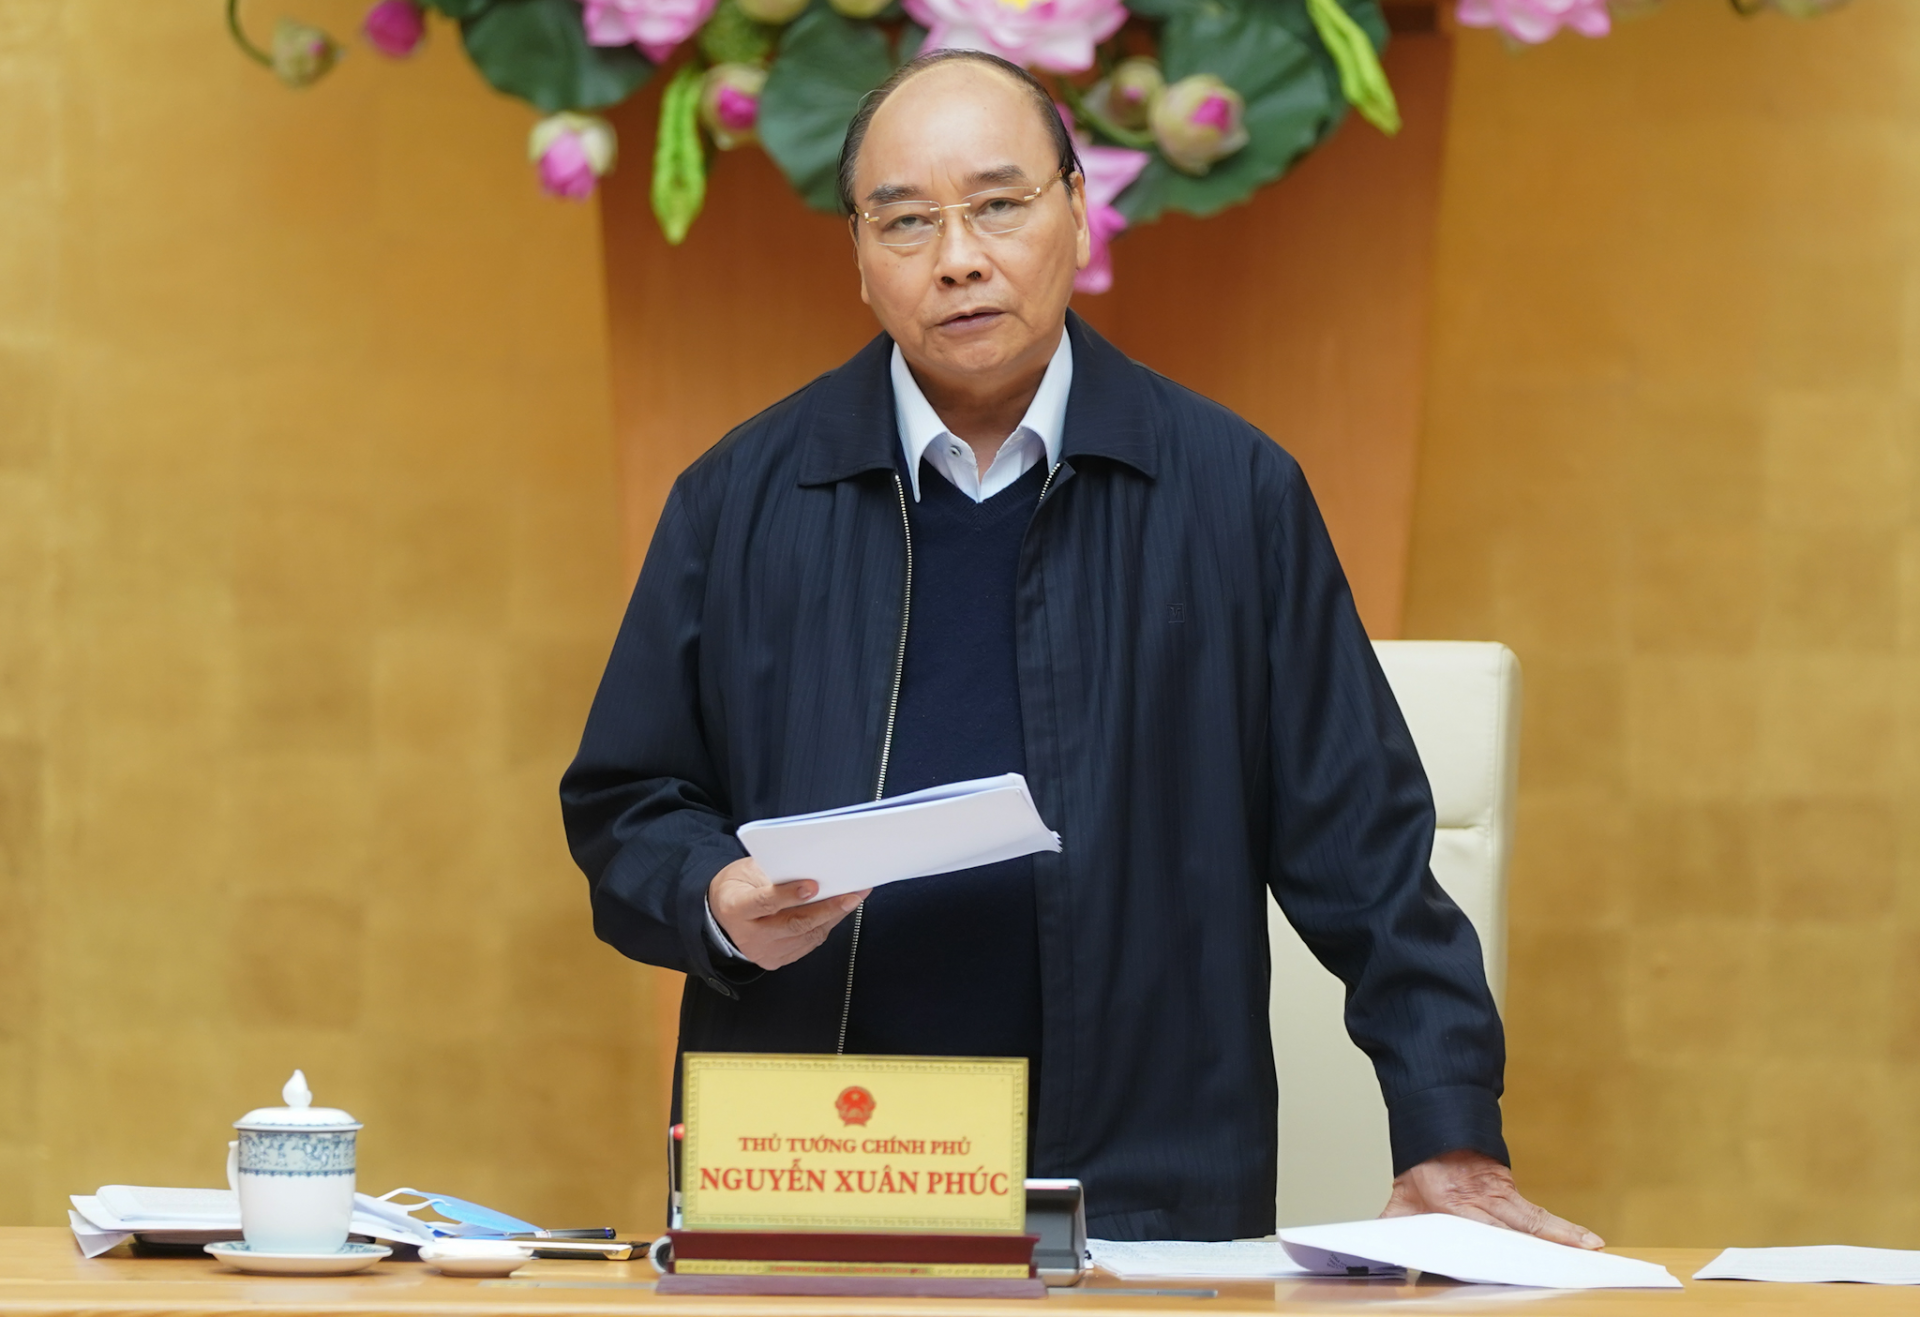 Vietnam social welfare package should be hastened to pandemic-affected groups